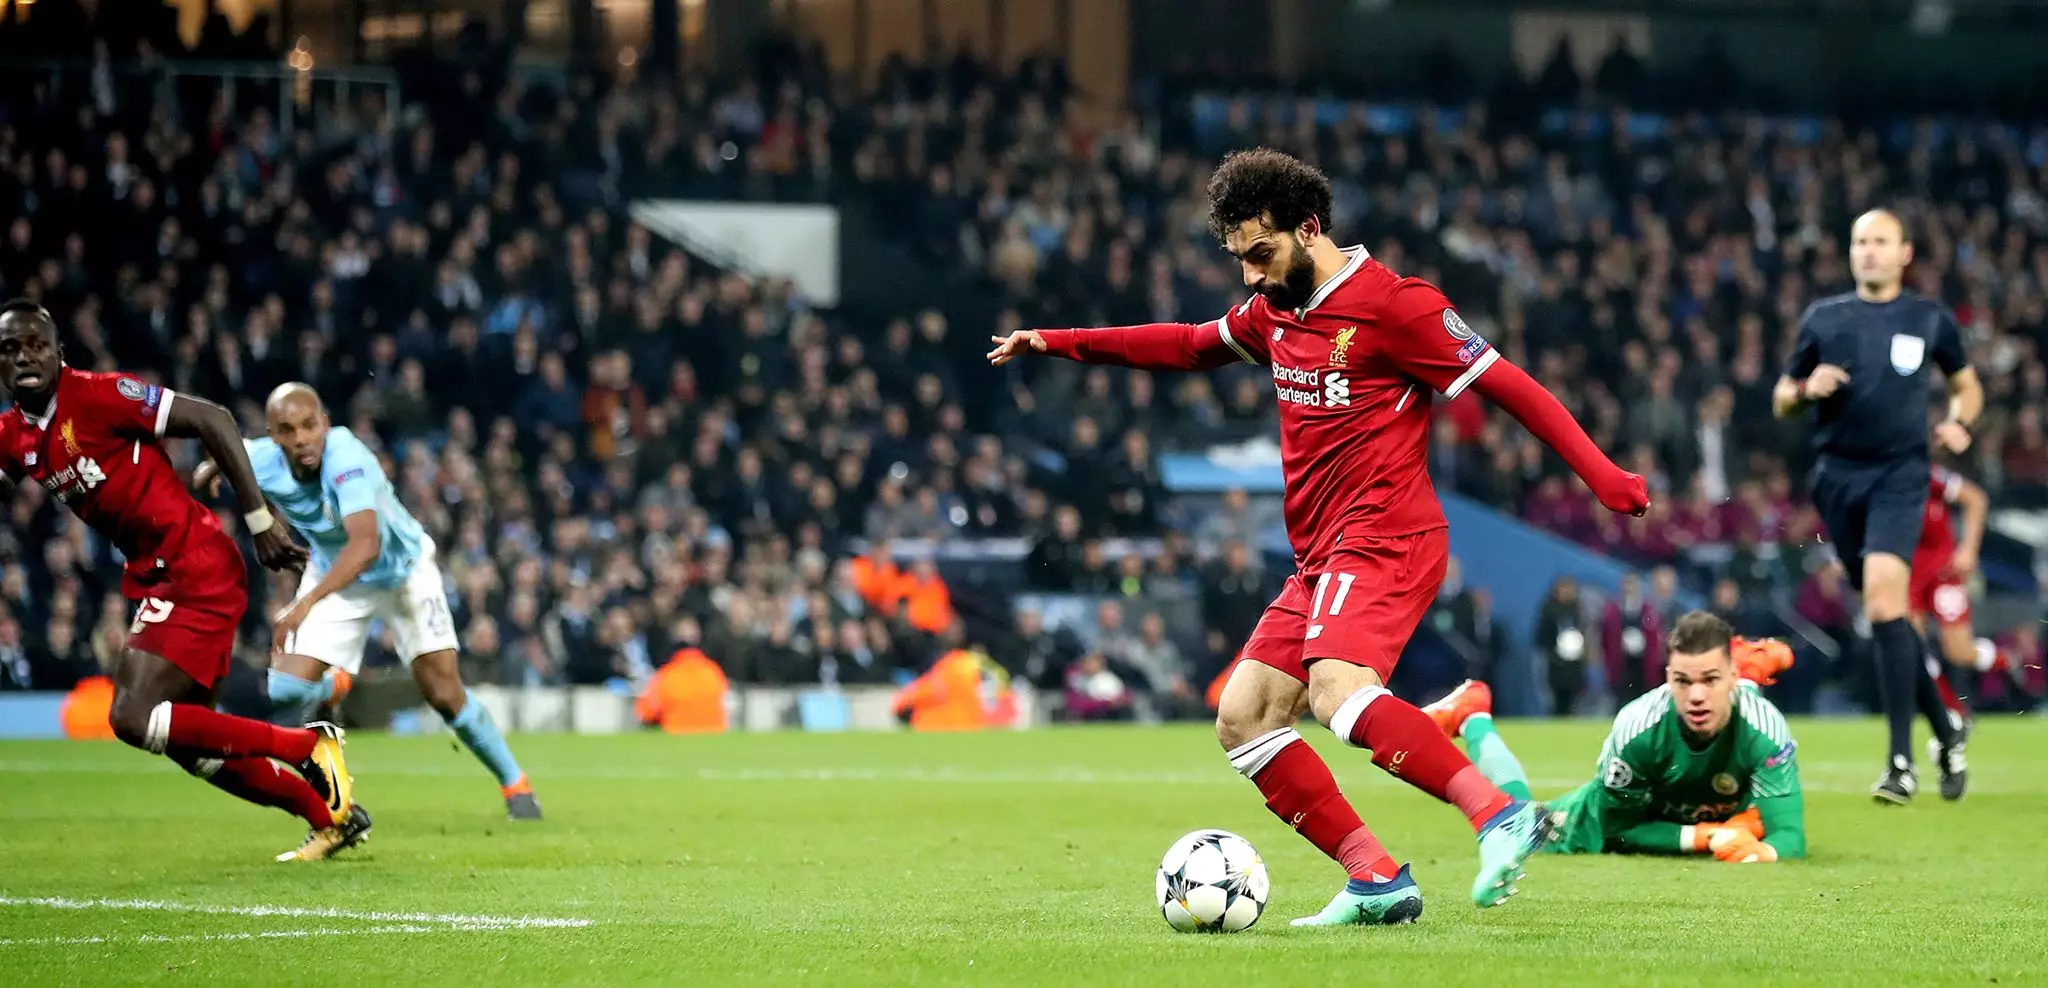 Salah scores an away goal against Manchester City in the Champions League. Image: PA